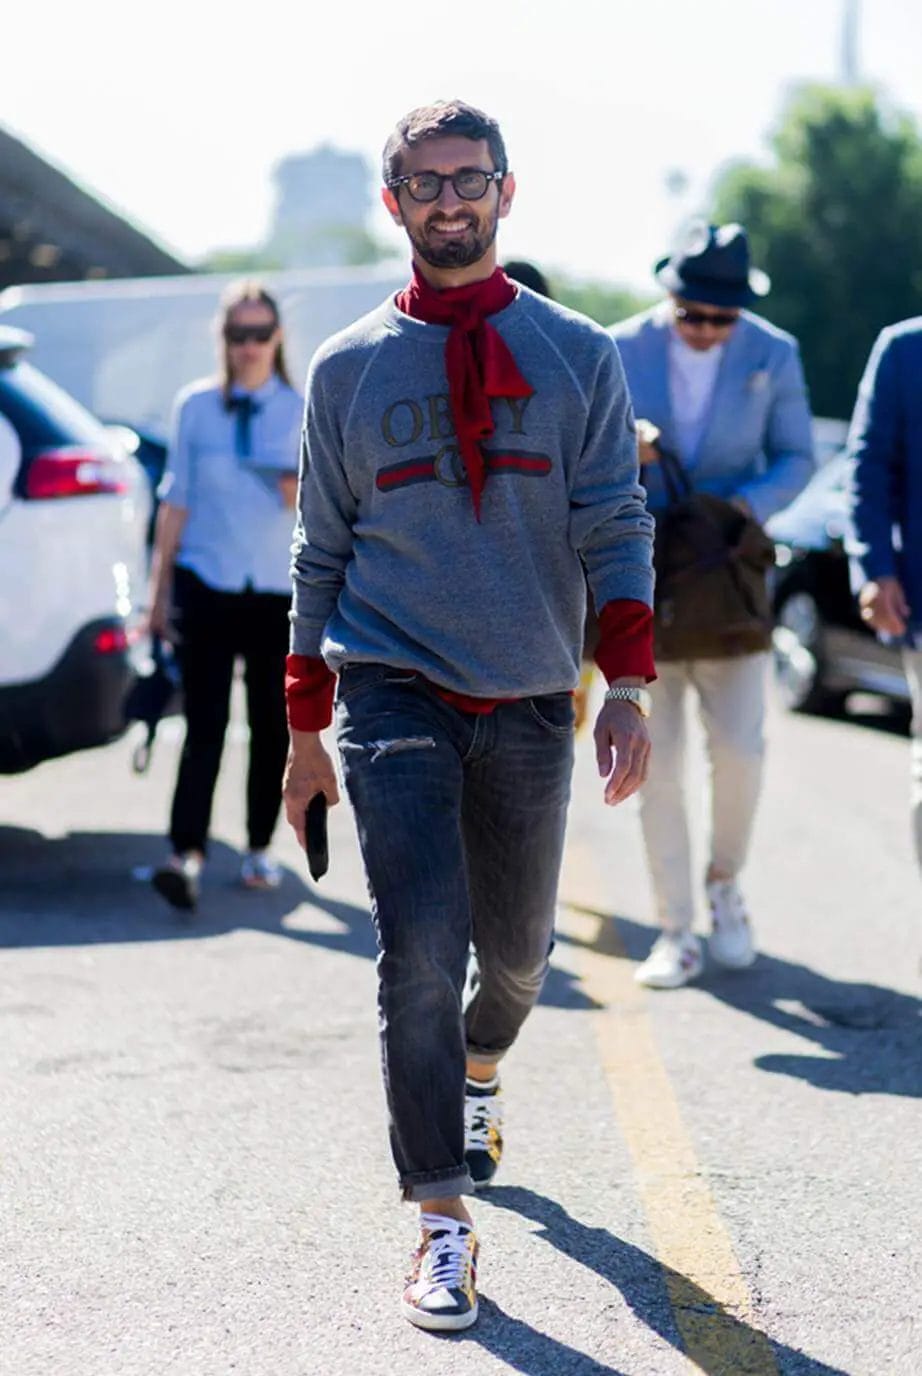 These different menâ€™s fashion styles are perfect to act as a lookbook for those who have a hard time figuring what to wear according to the best style for them.